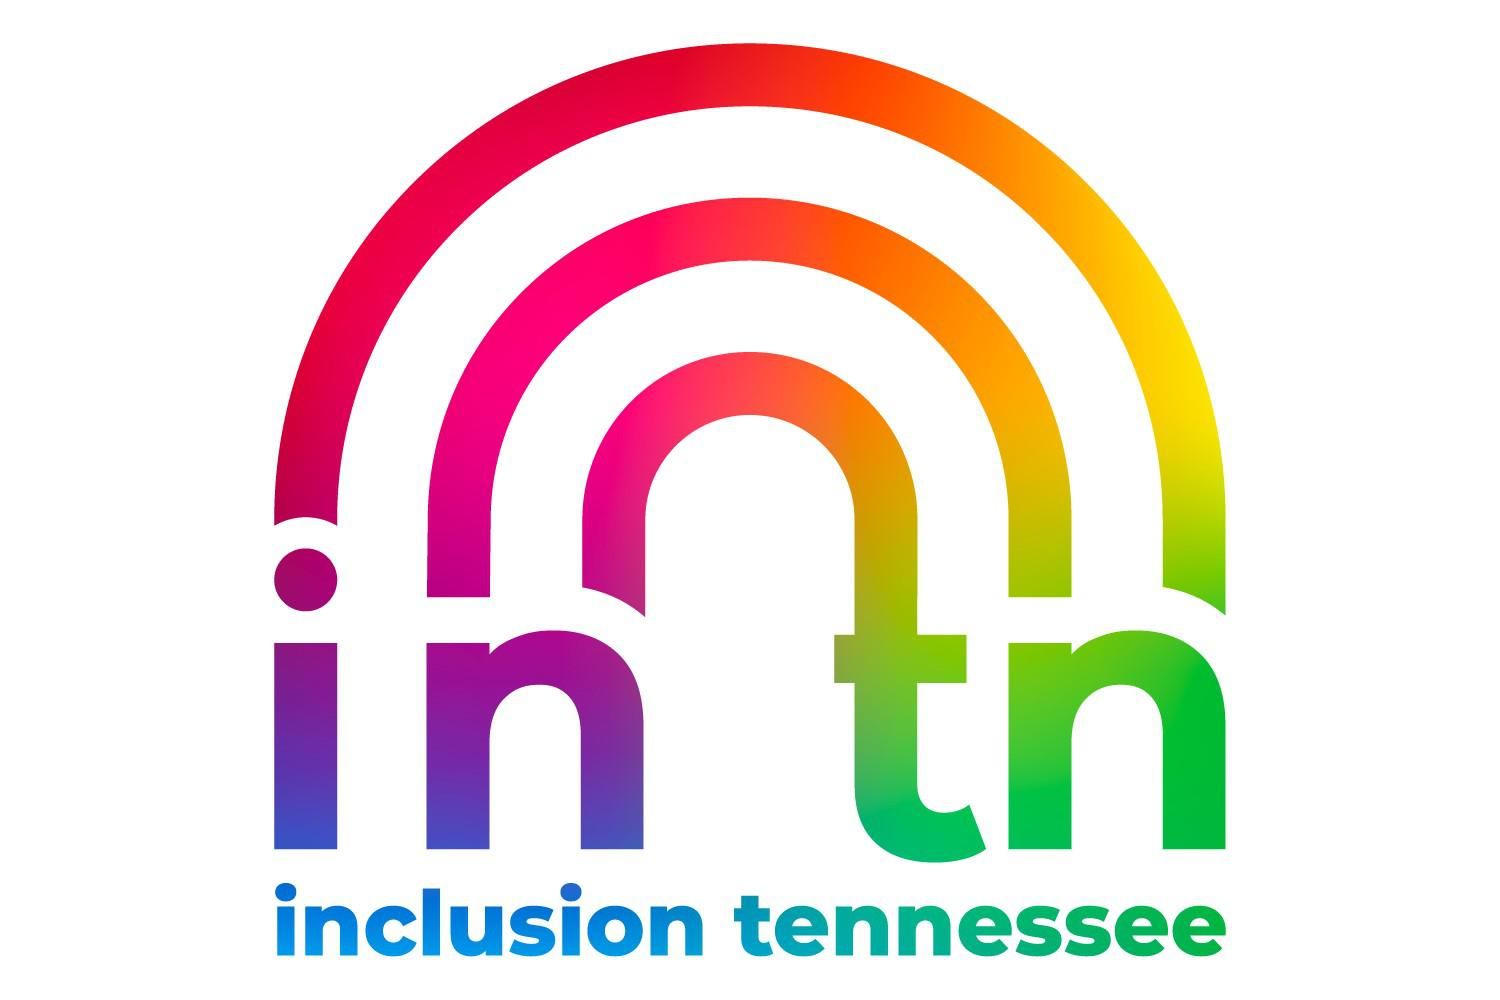 inclusion tennessee logo in the colors and shape of a rainbow.